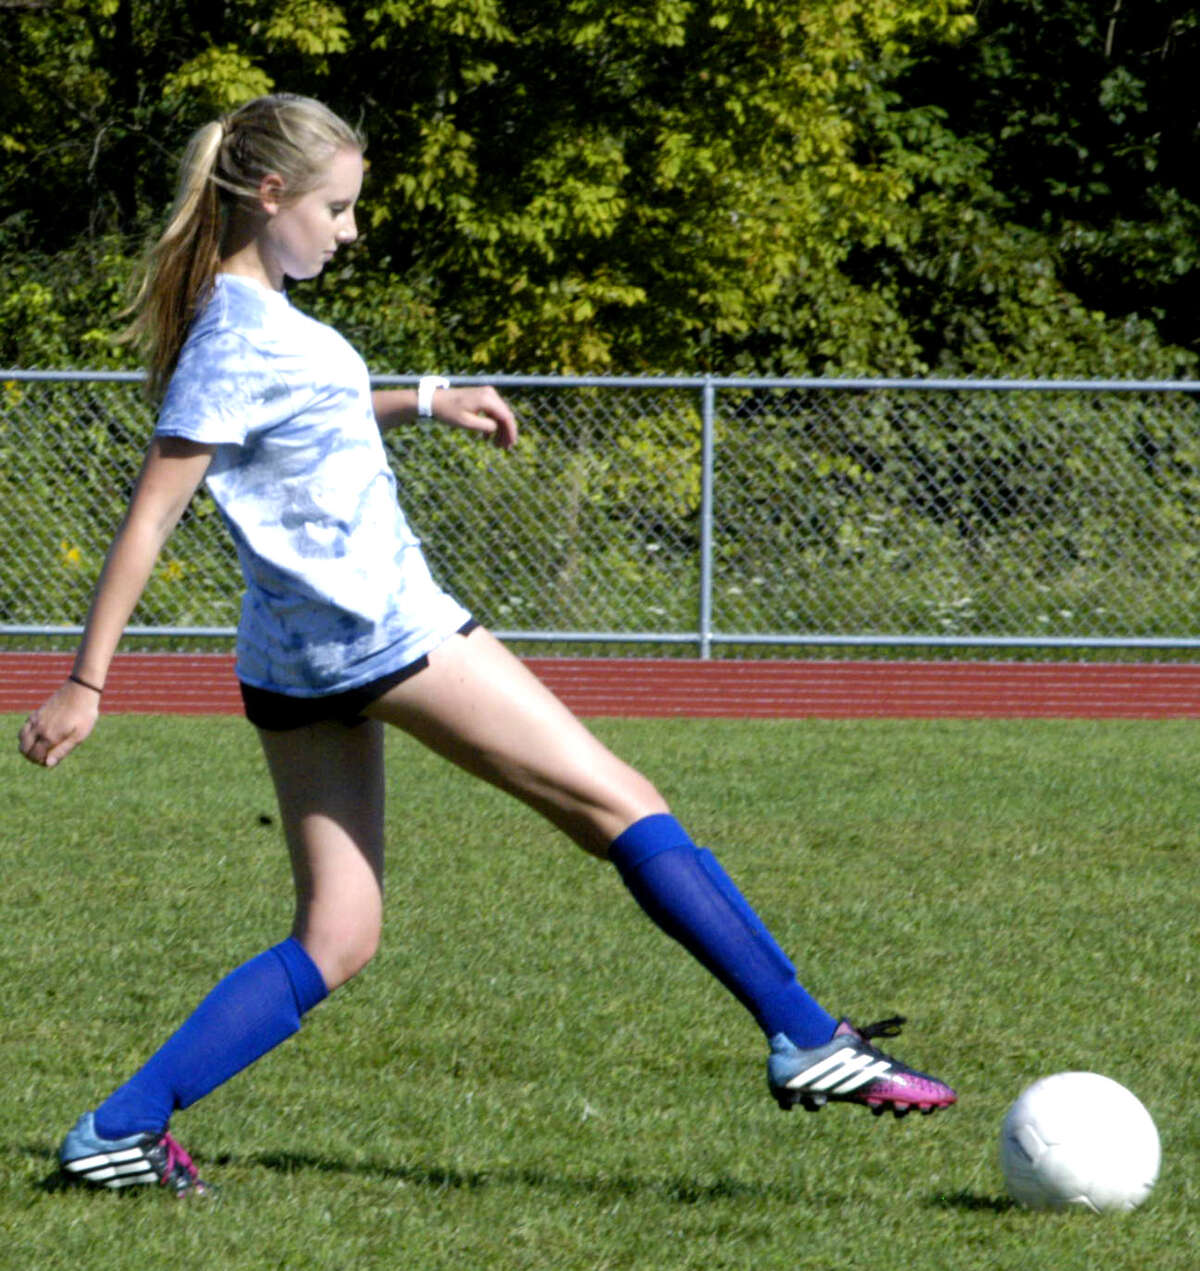 The Spartans engage in a pre-season scrimmage for Shepaug Valley High School girls' soccer. September 2013